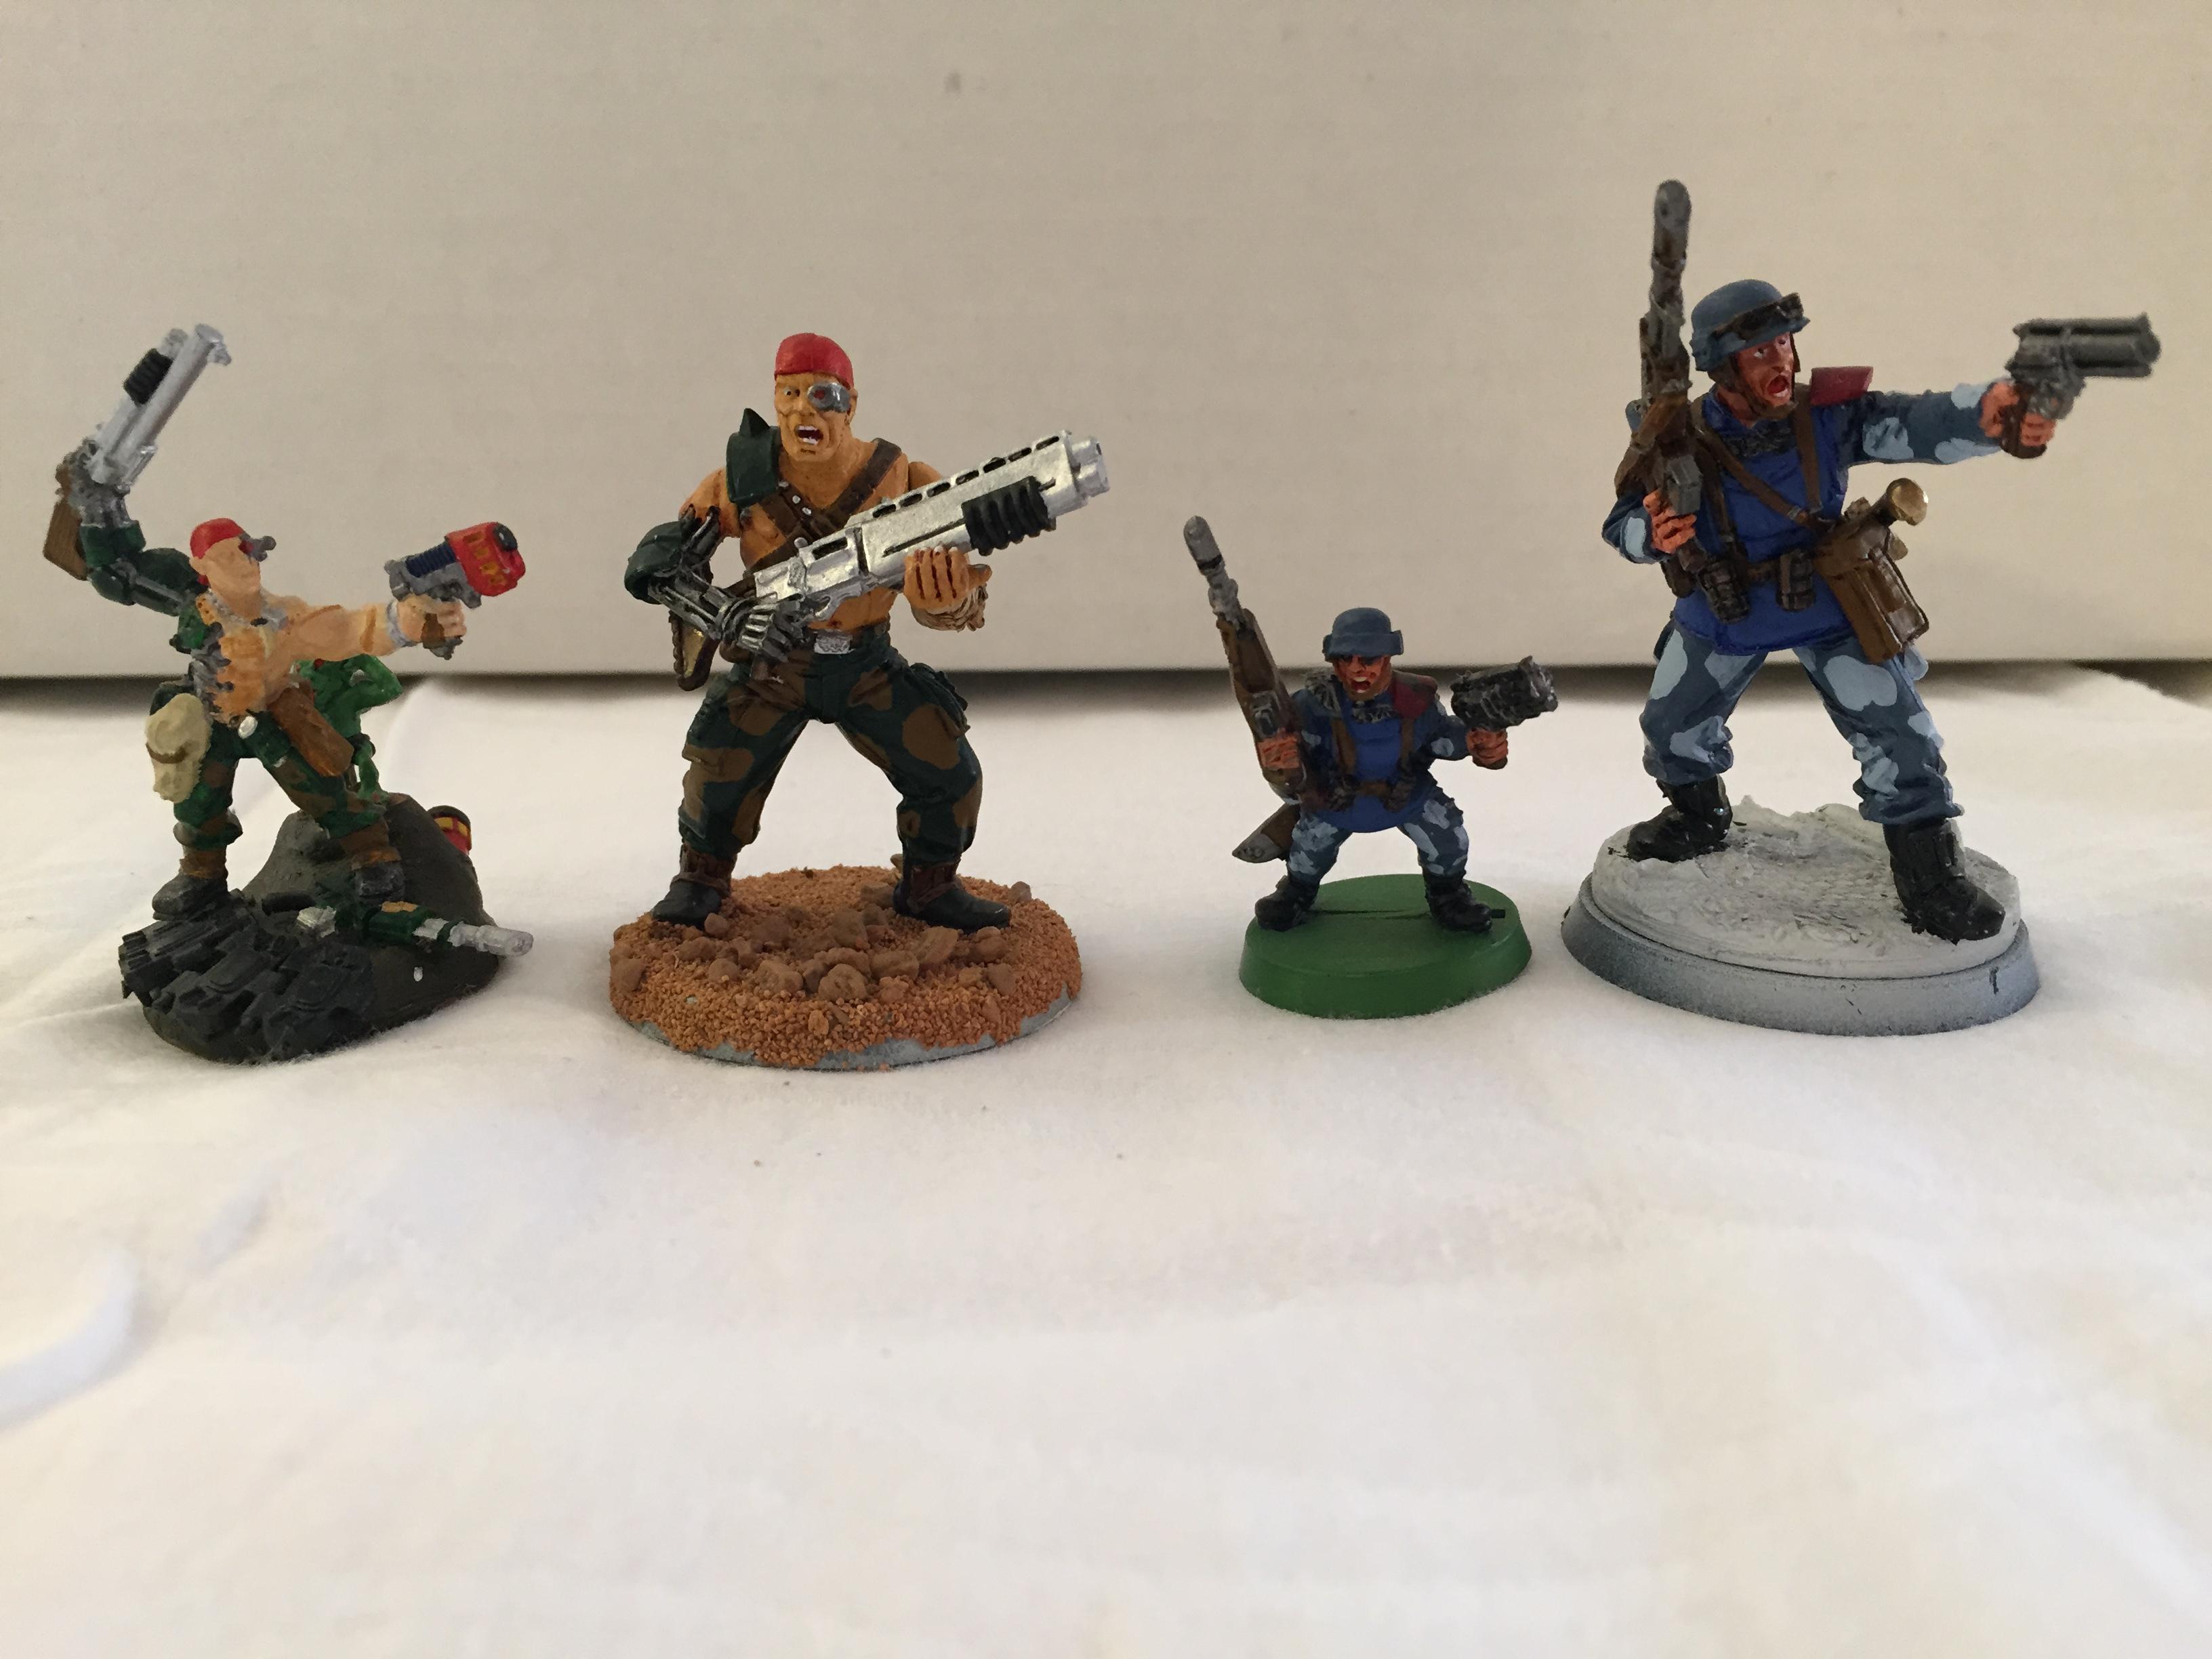 54mm, Cadians, Catachan, Conversion, Imperial Guard, Inq28, Inquisitor, Scale